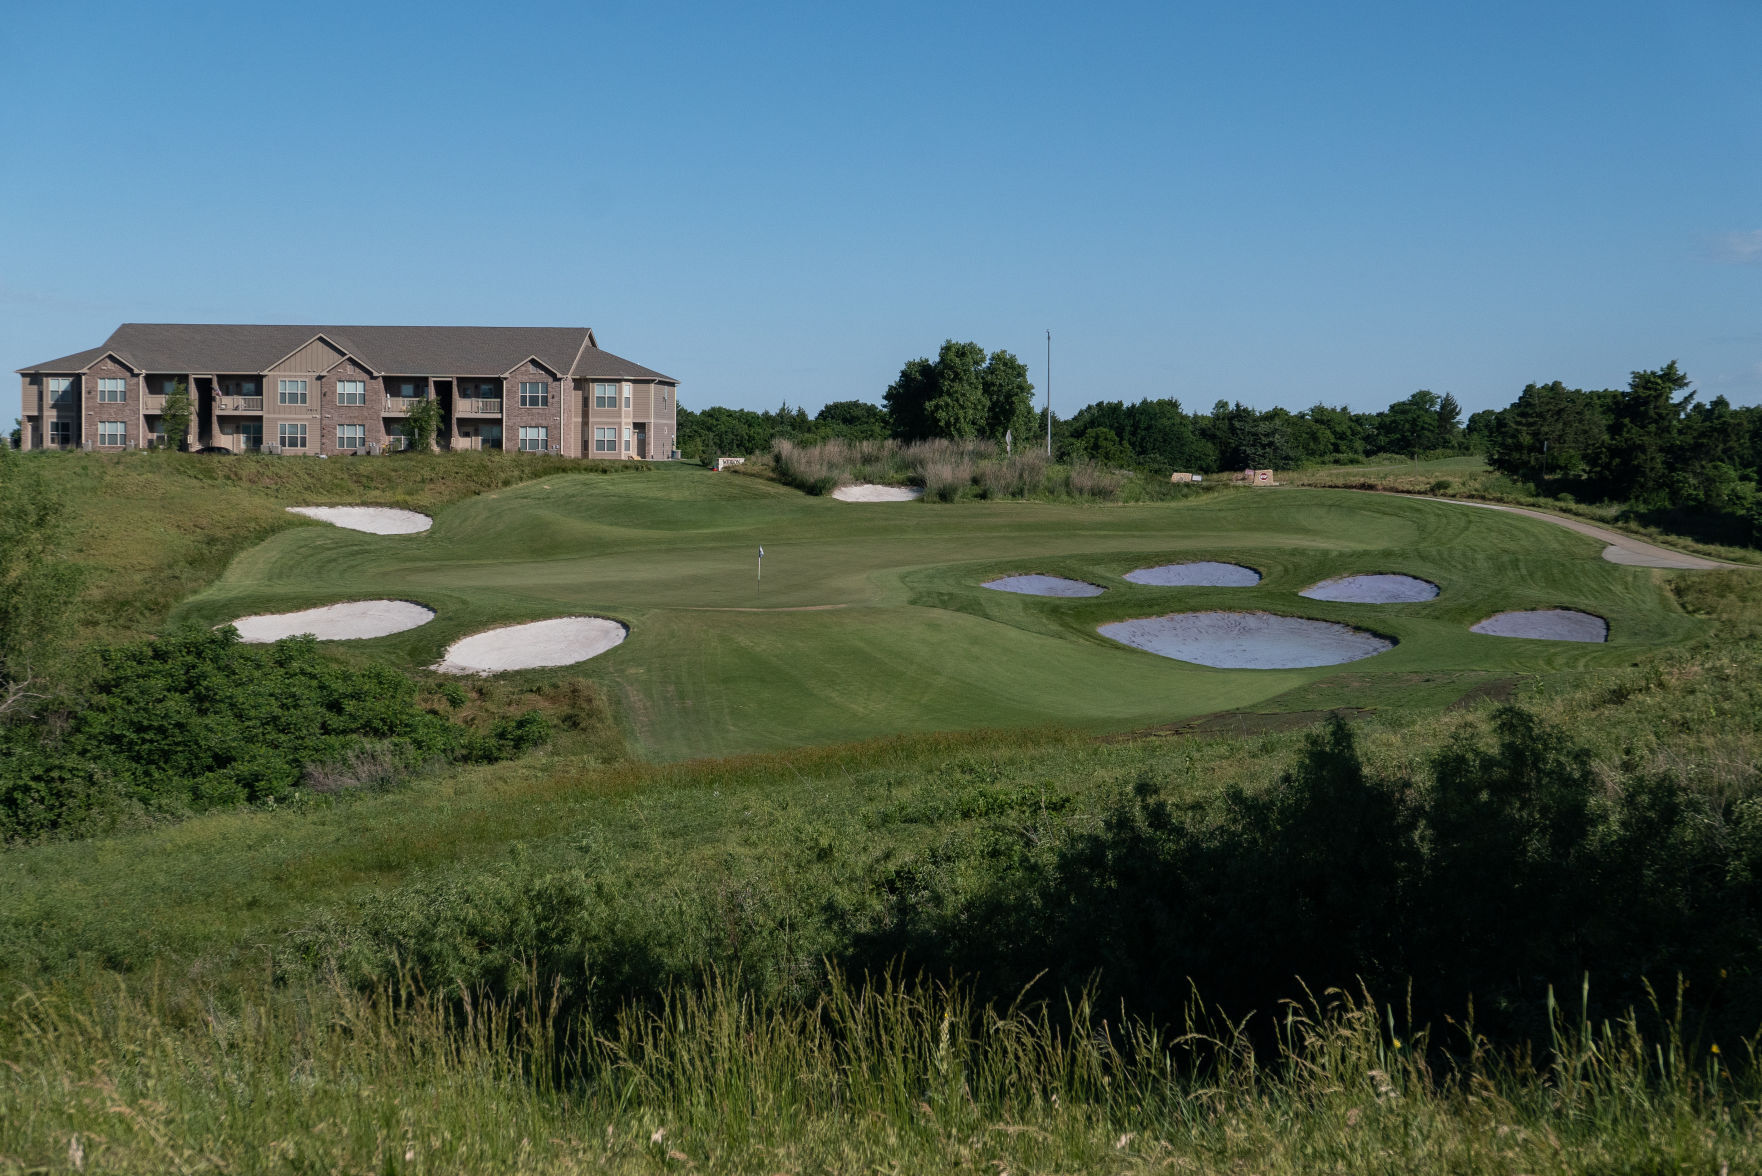 Colbert Hills proves to be outstanding course for Kansas Amateur Match Play Championship Sports themercury